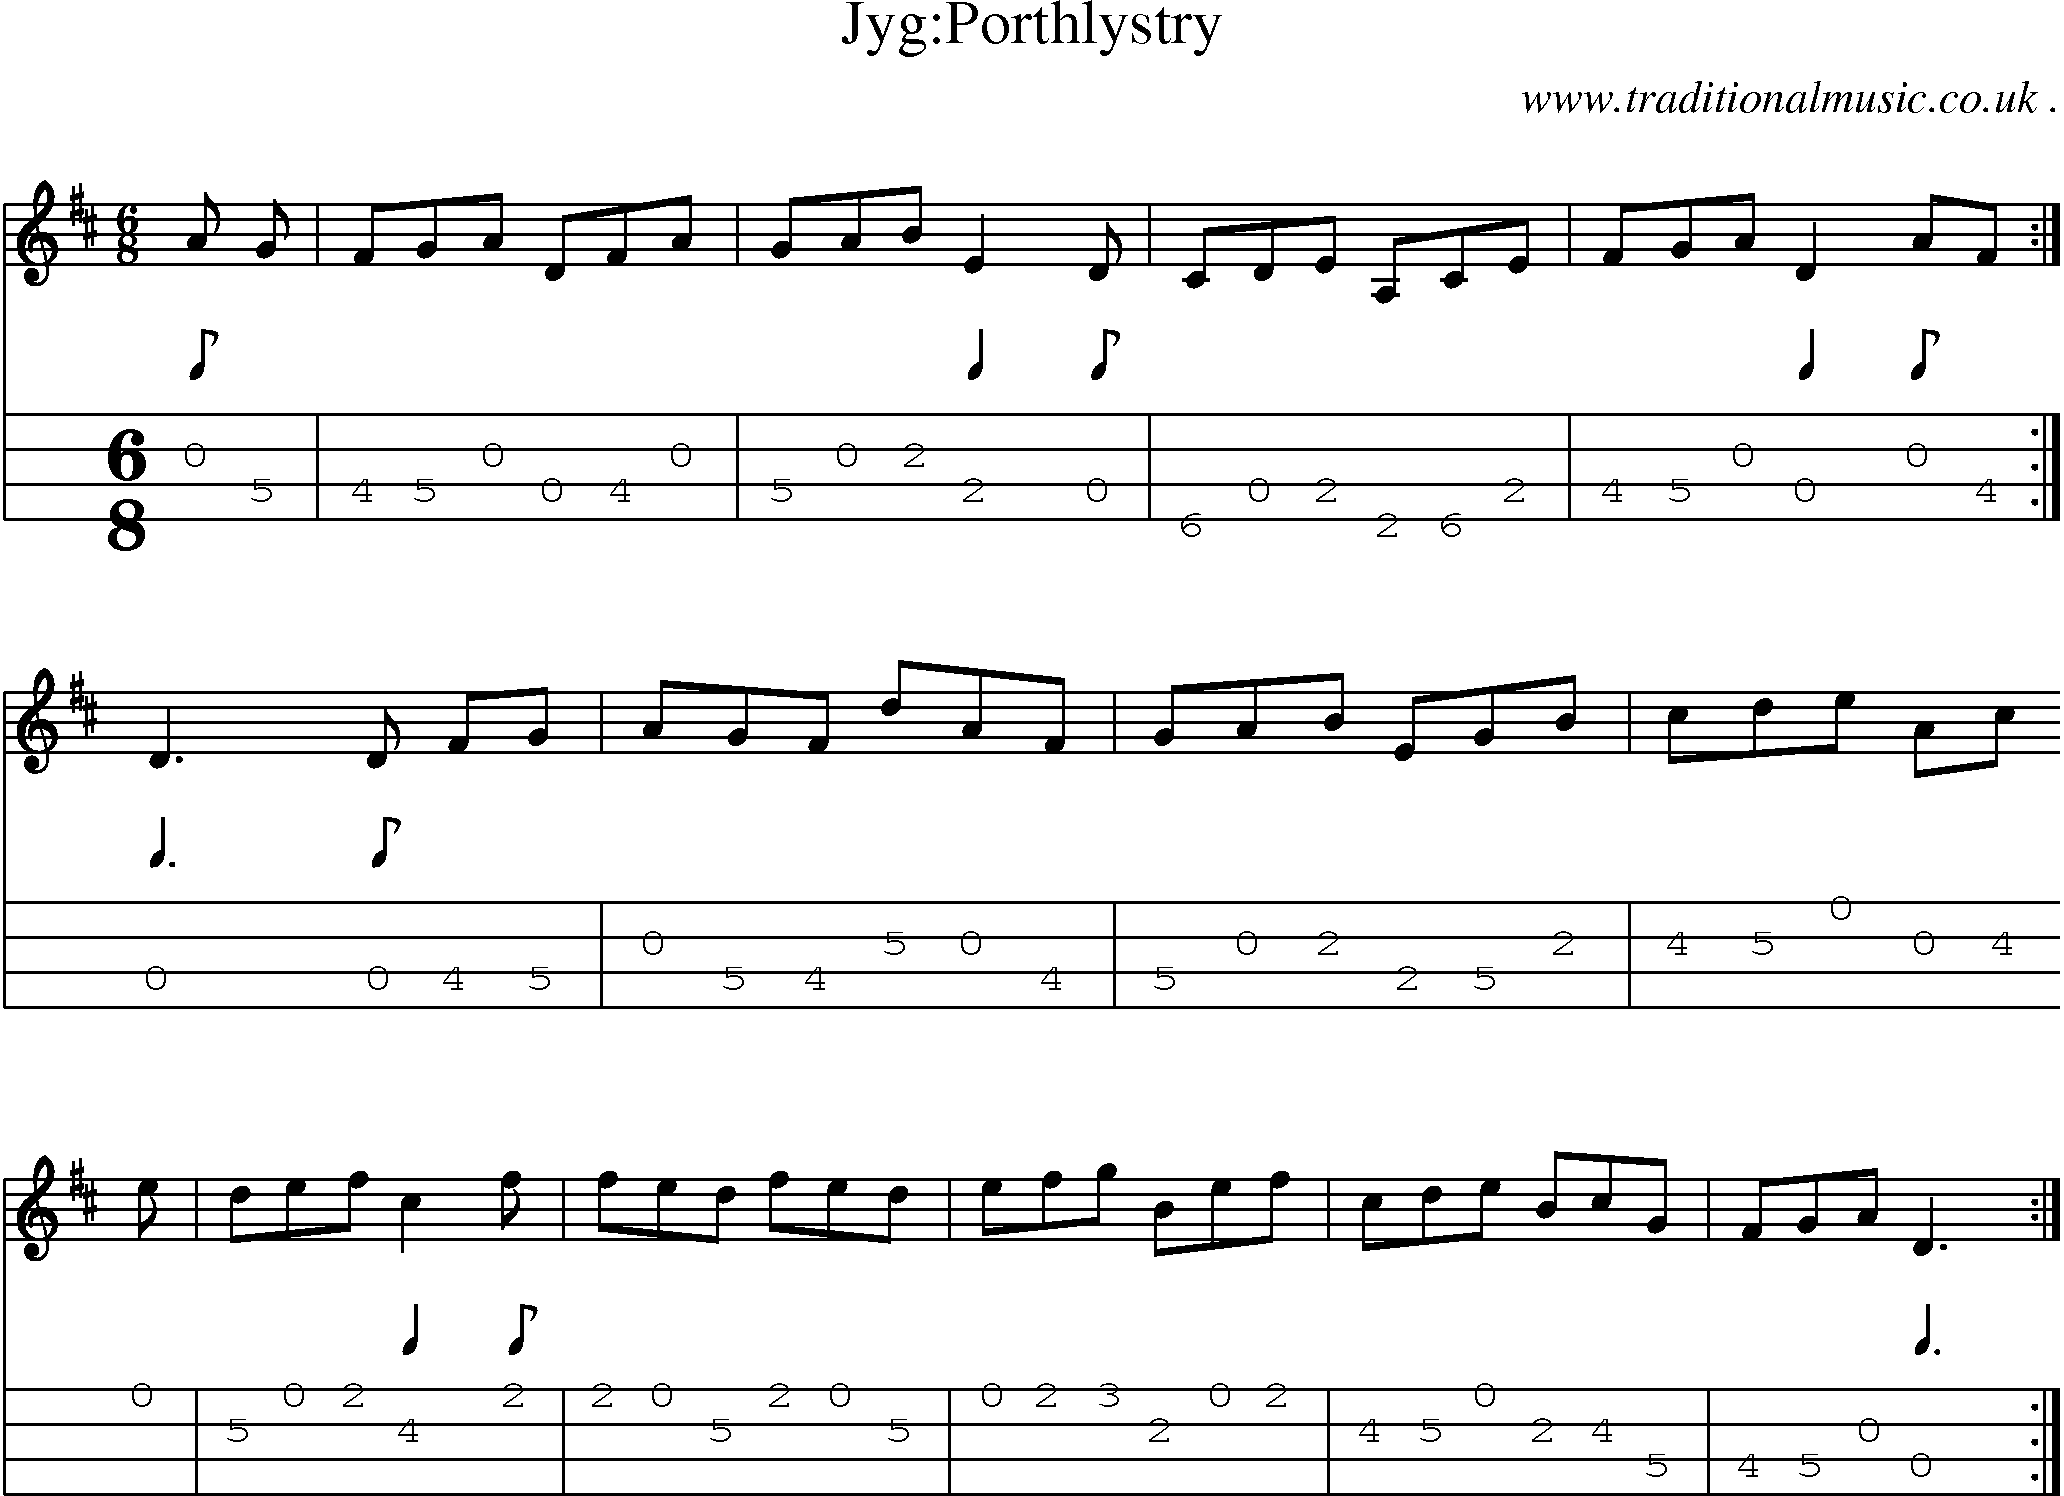 Sheet-Music and Mandolin Tabs for Jygporthlystry